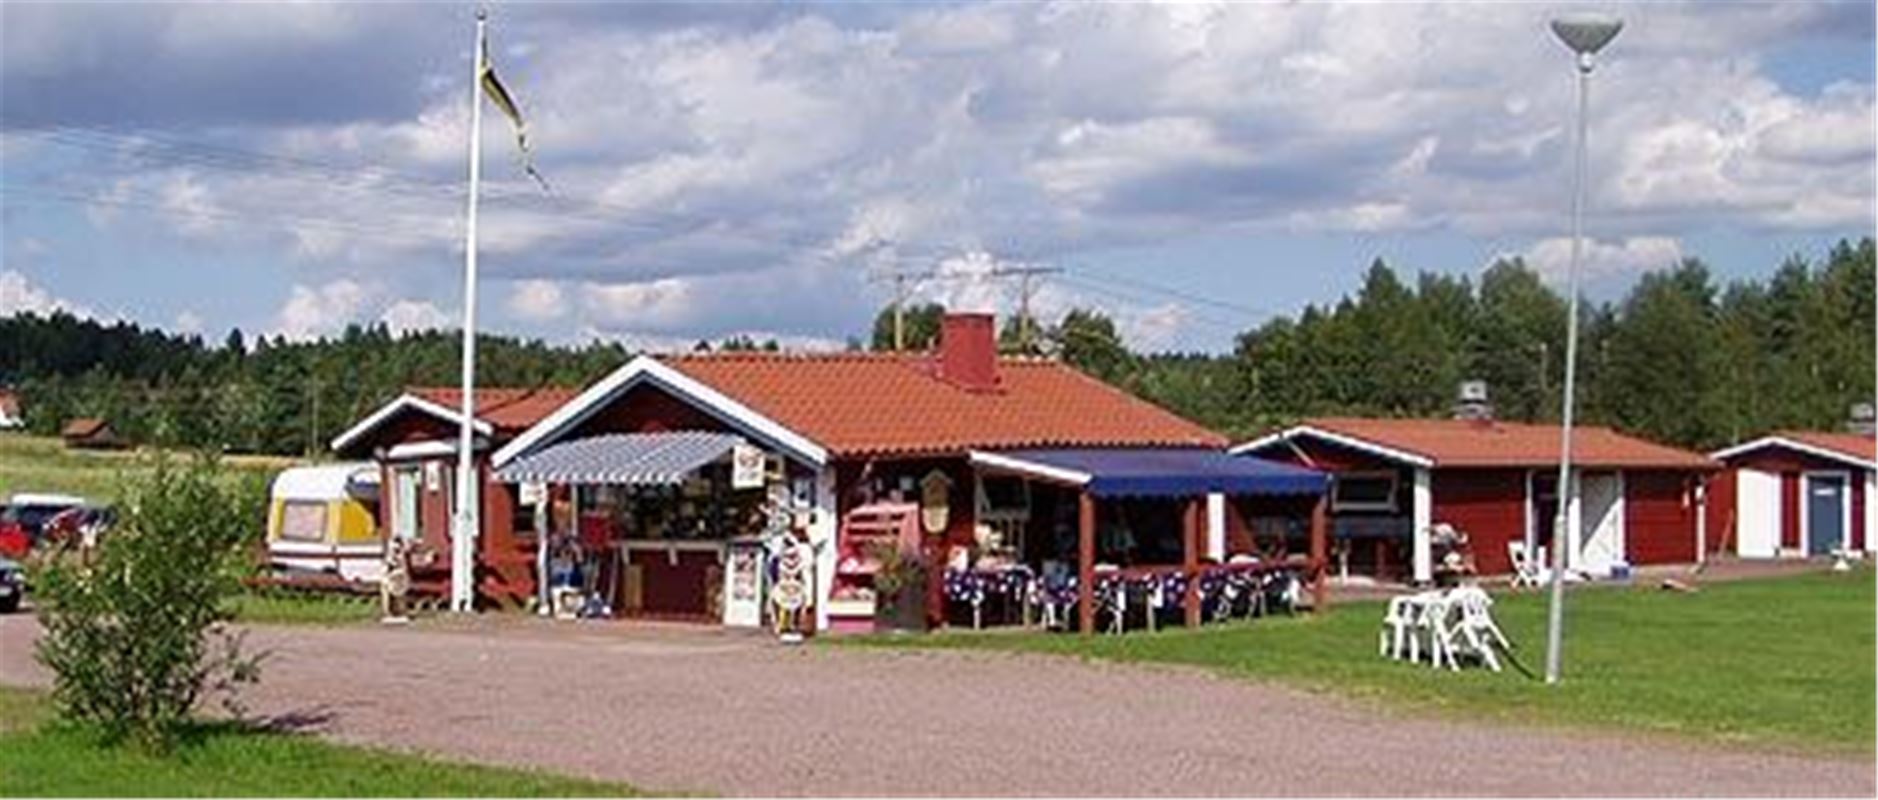 Exterior of the campsite of Siljansnäs camping.